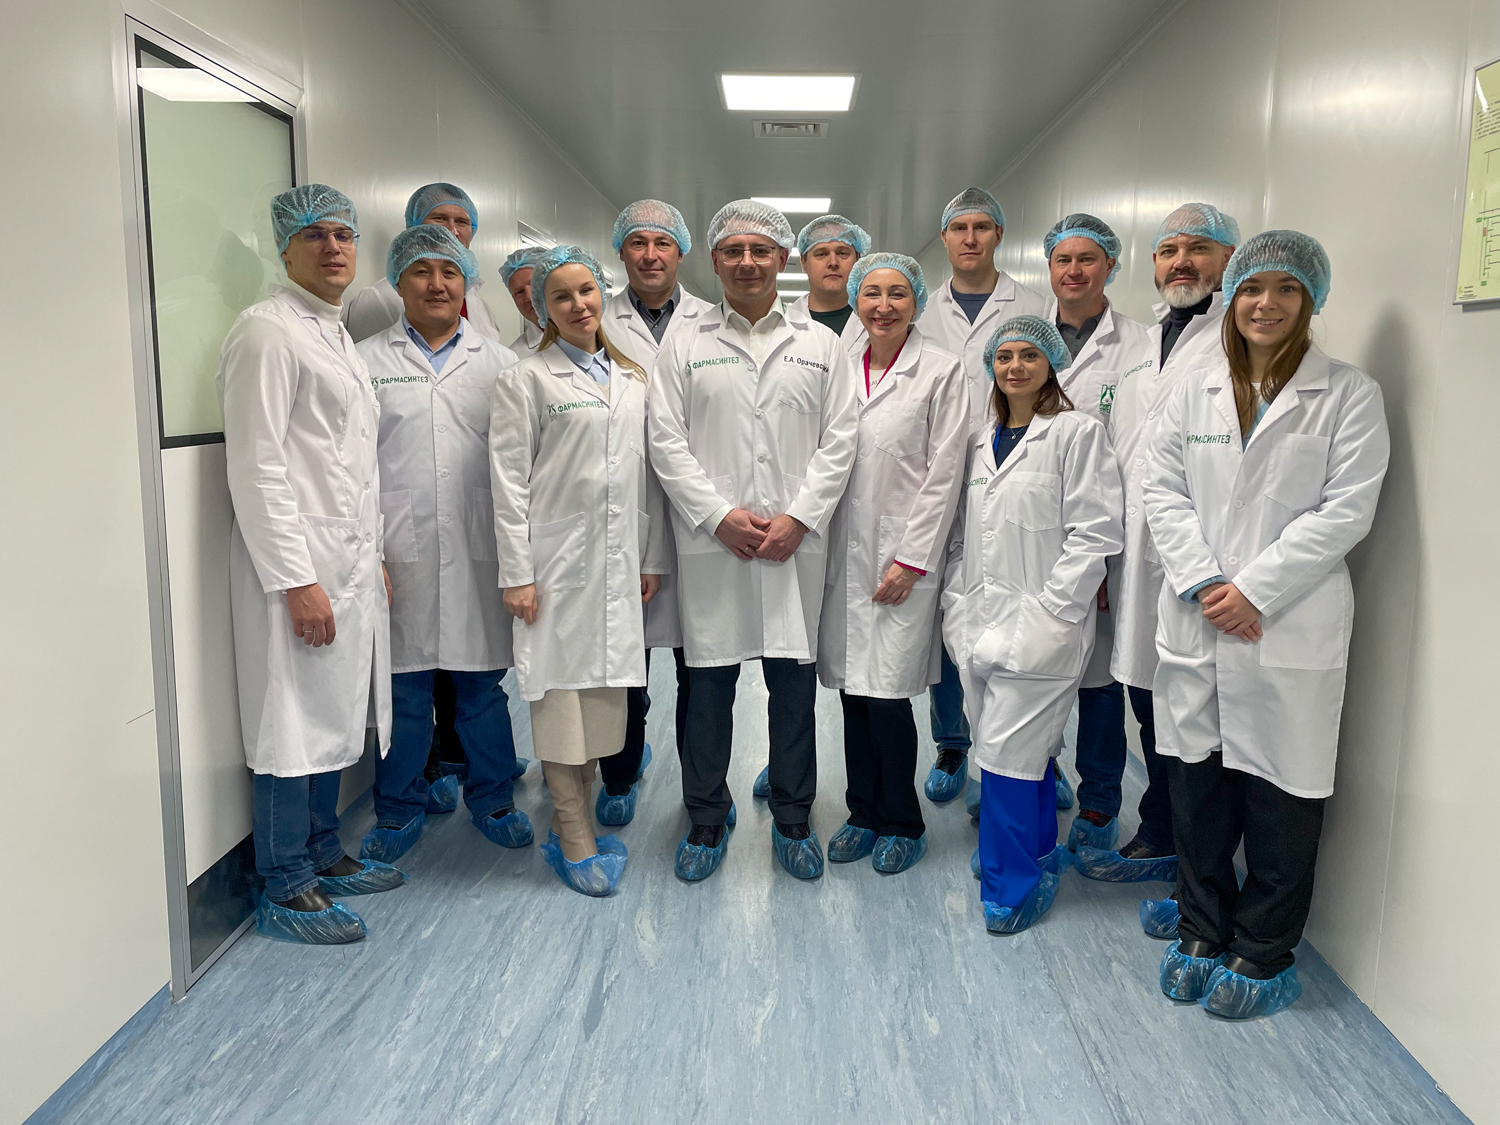 Winners of “Leaders of Russia” competition visited Pharmasyntez JSC